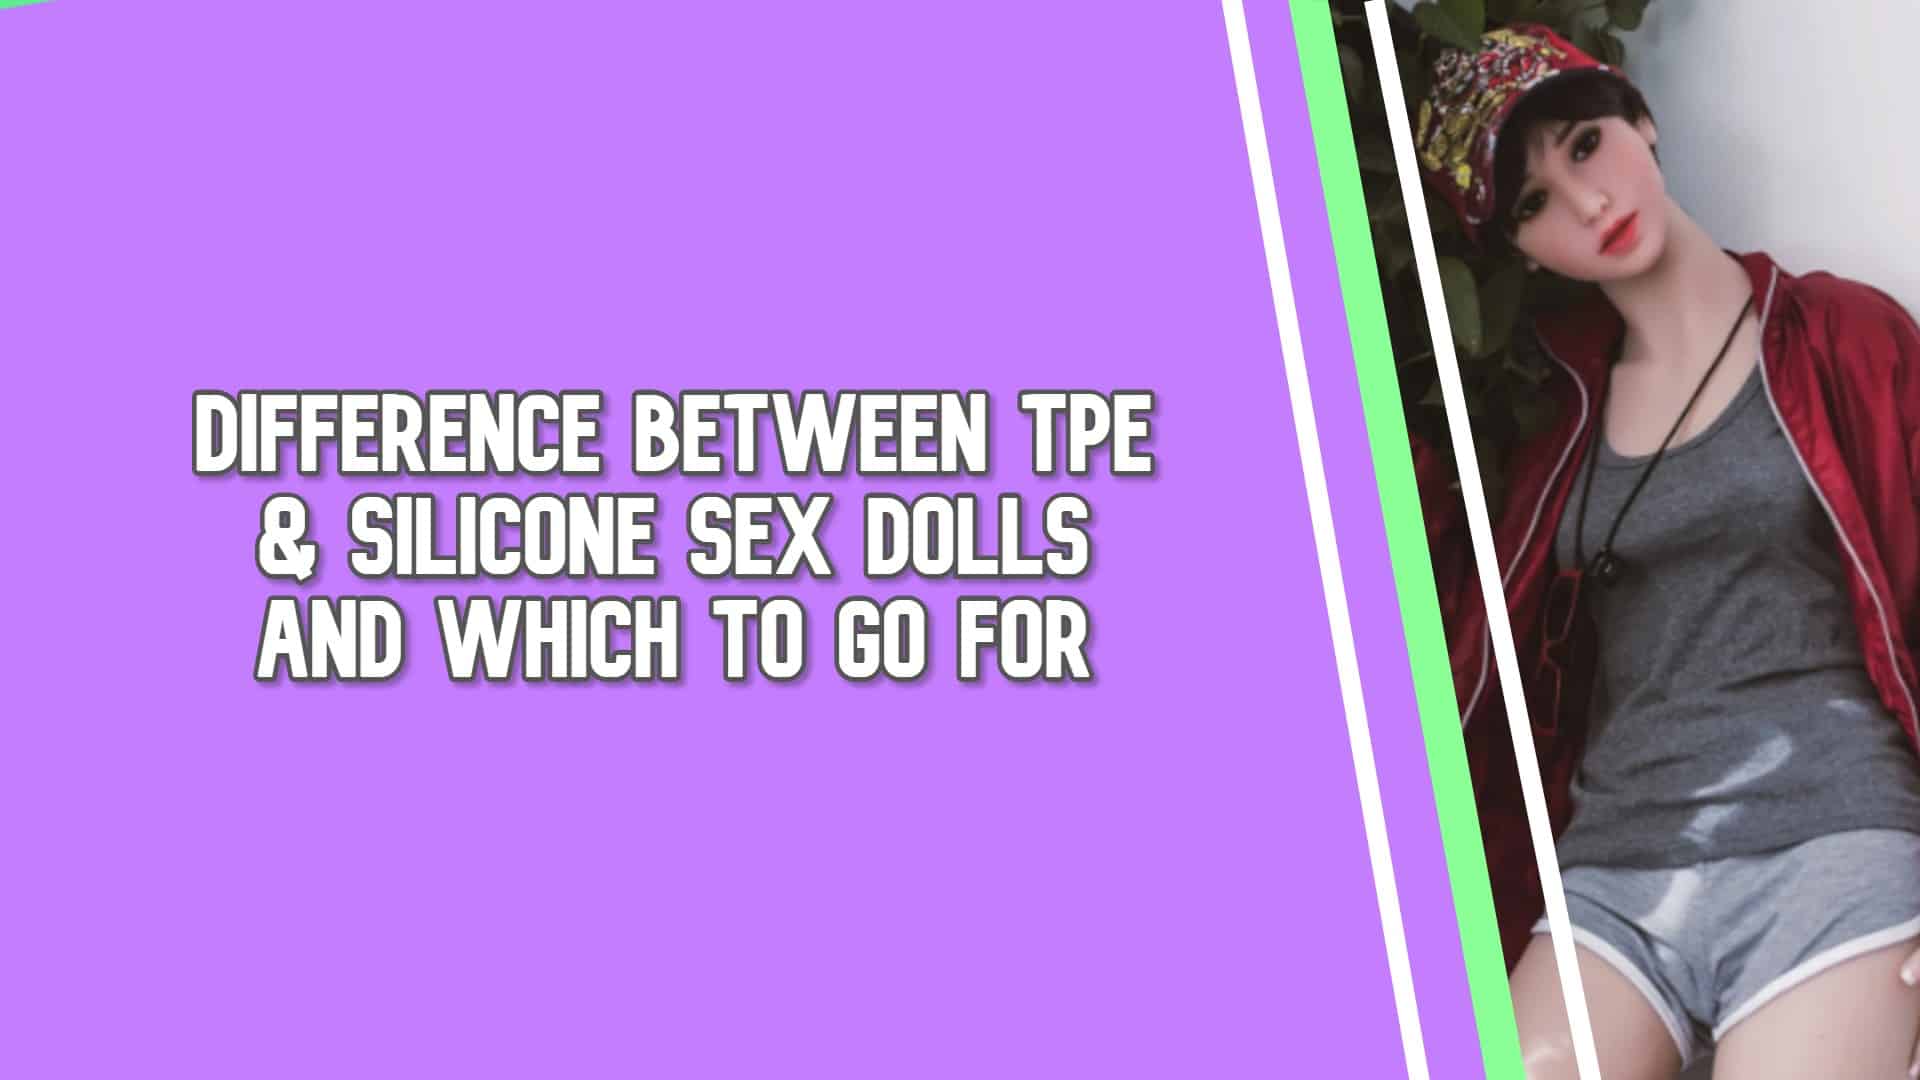 Difference between TPE & Silicone Sex Dolls and Which to Go For